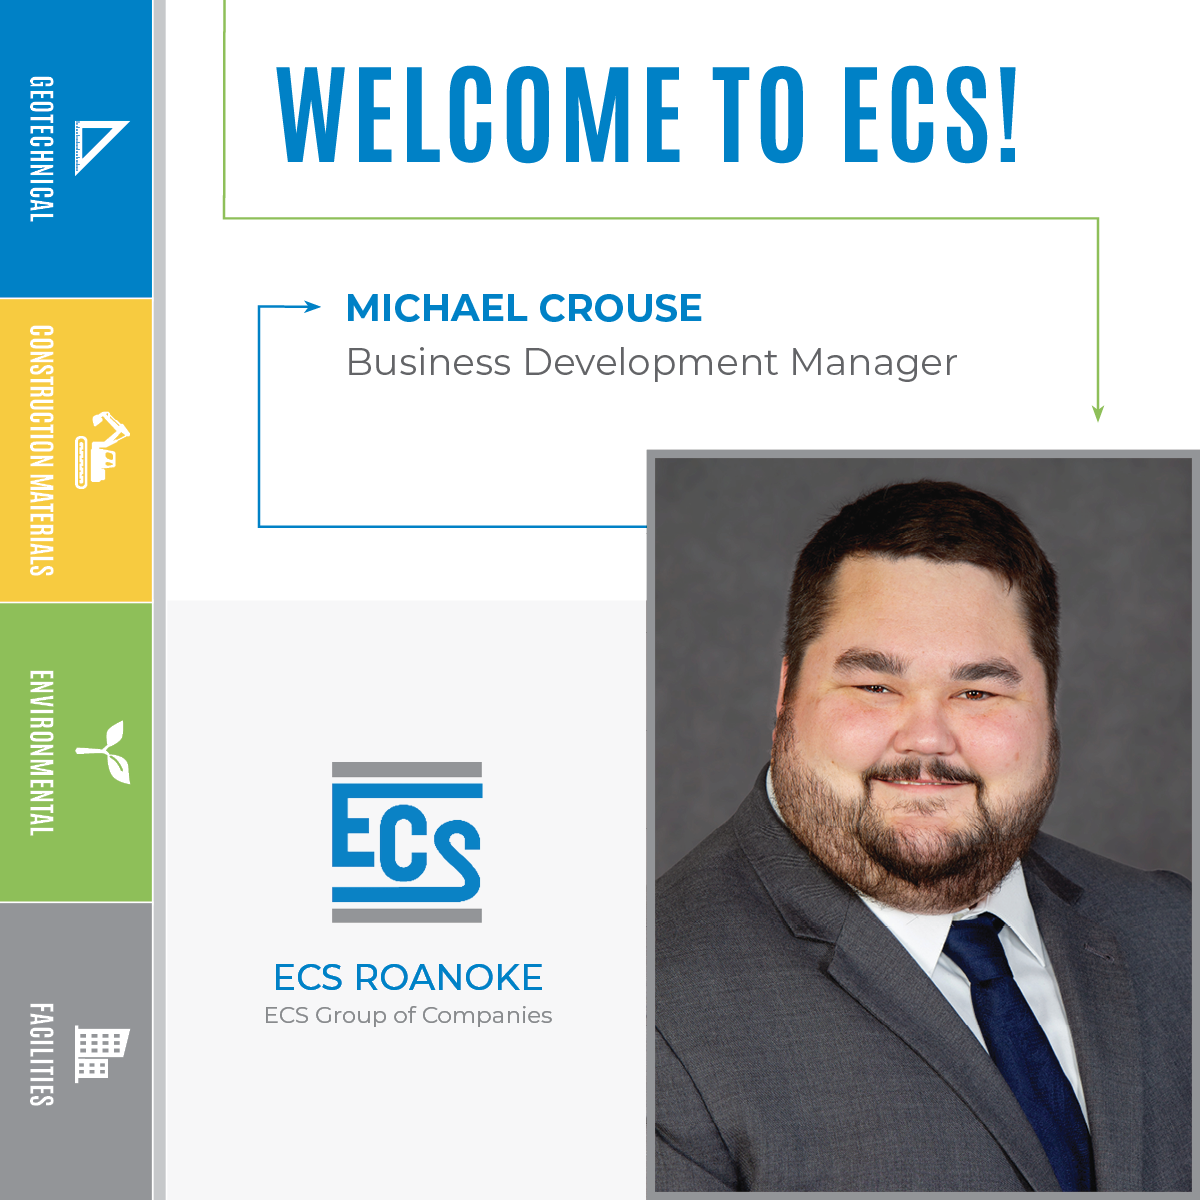 Graphic in ECS colors with ECS logo and headshot of Michael Crouse, Business Development Manager